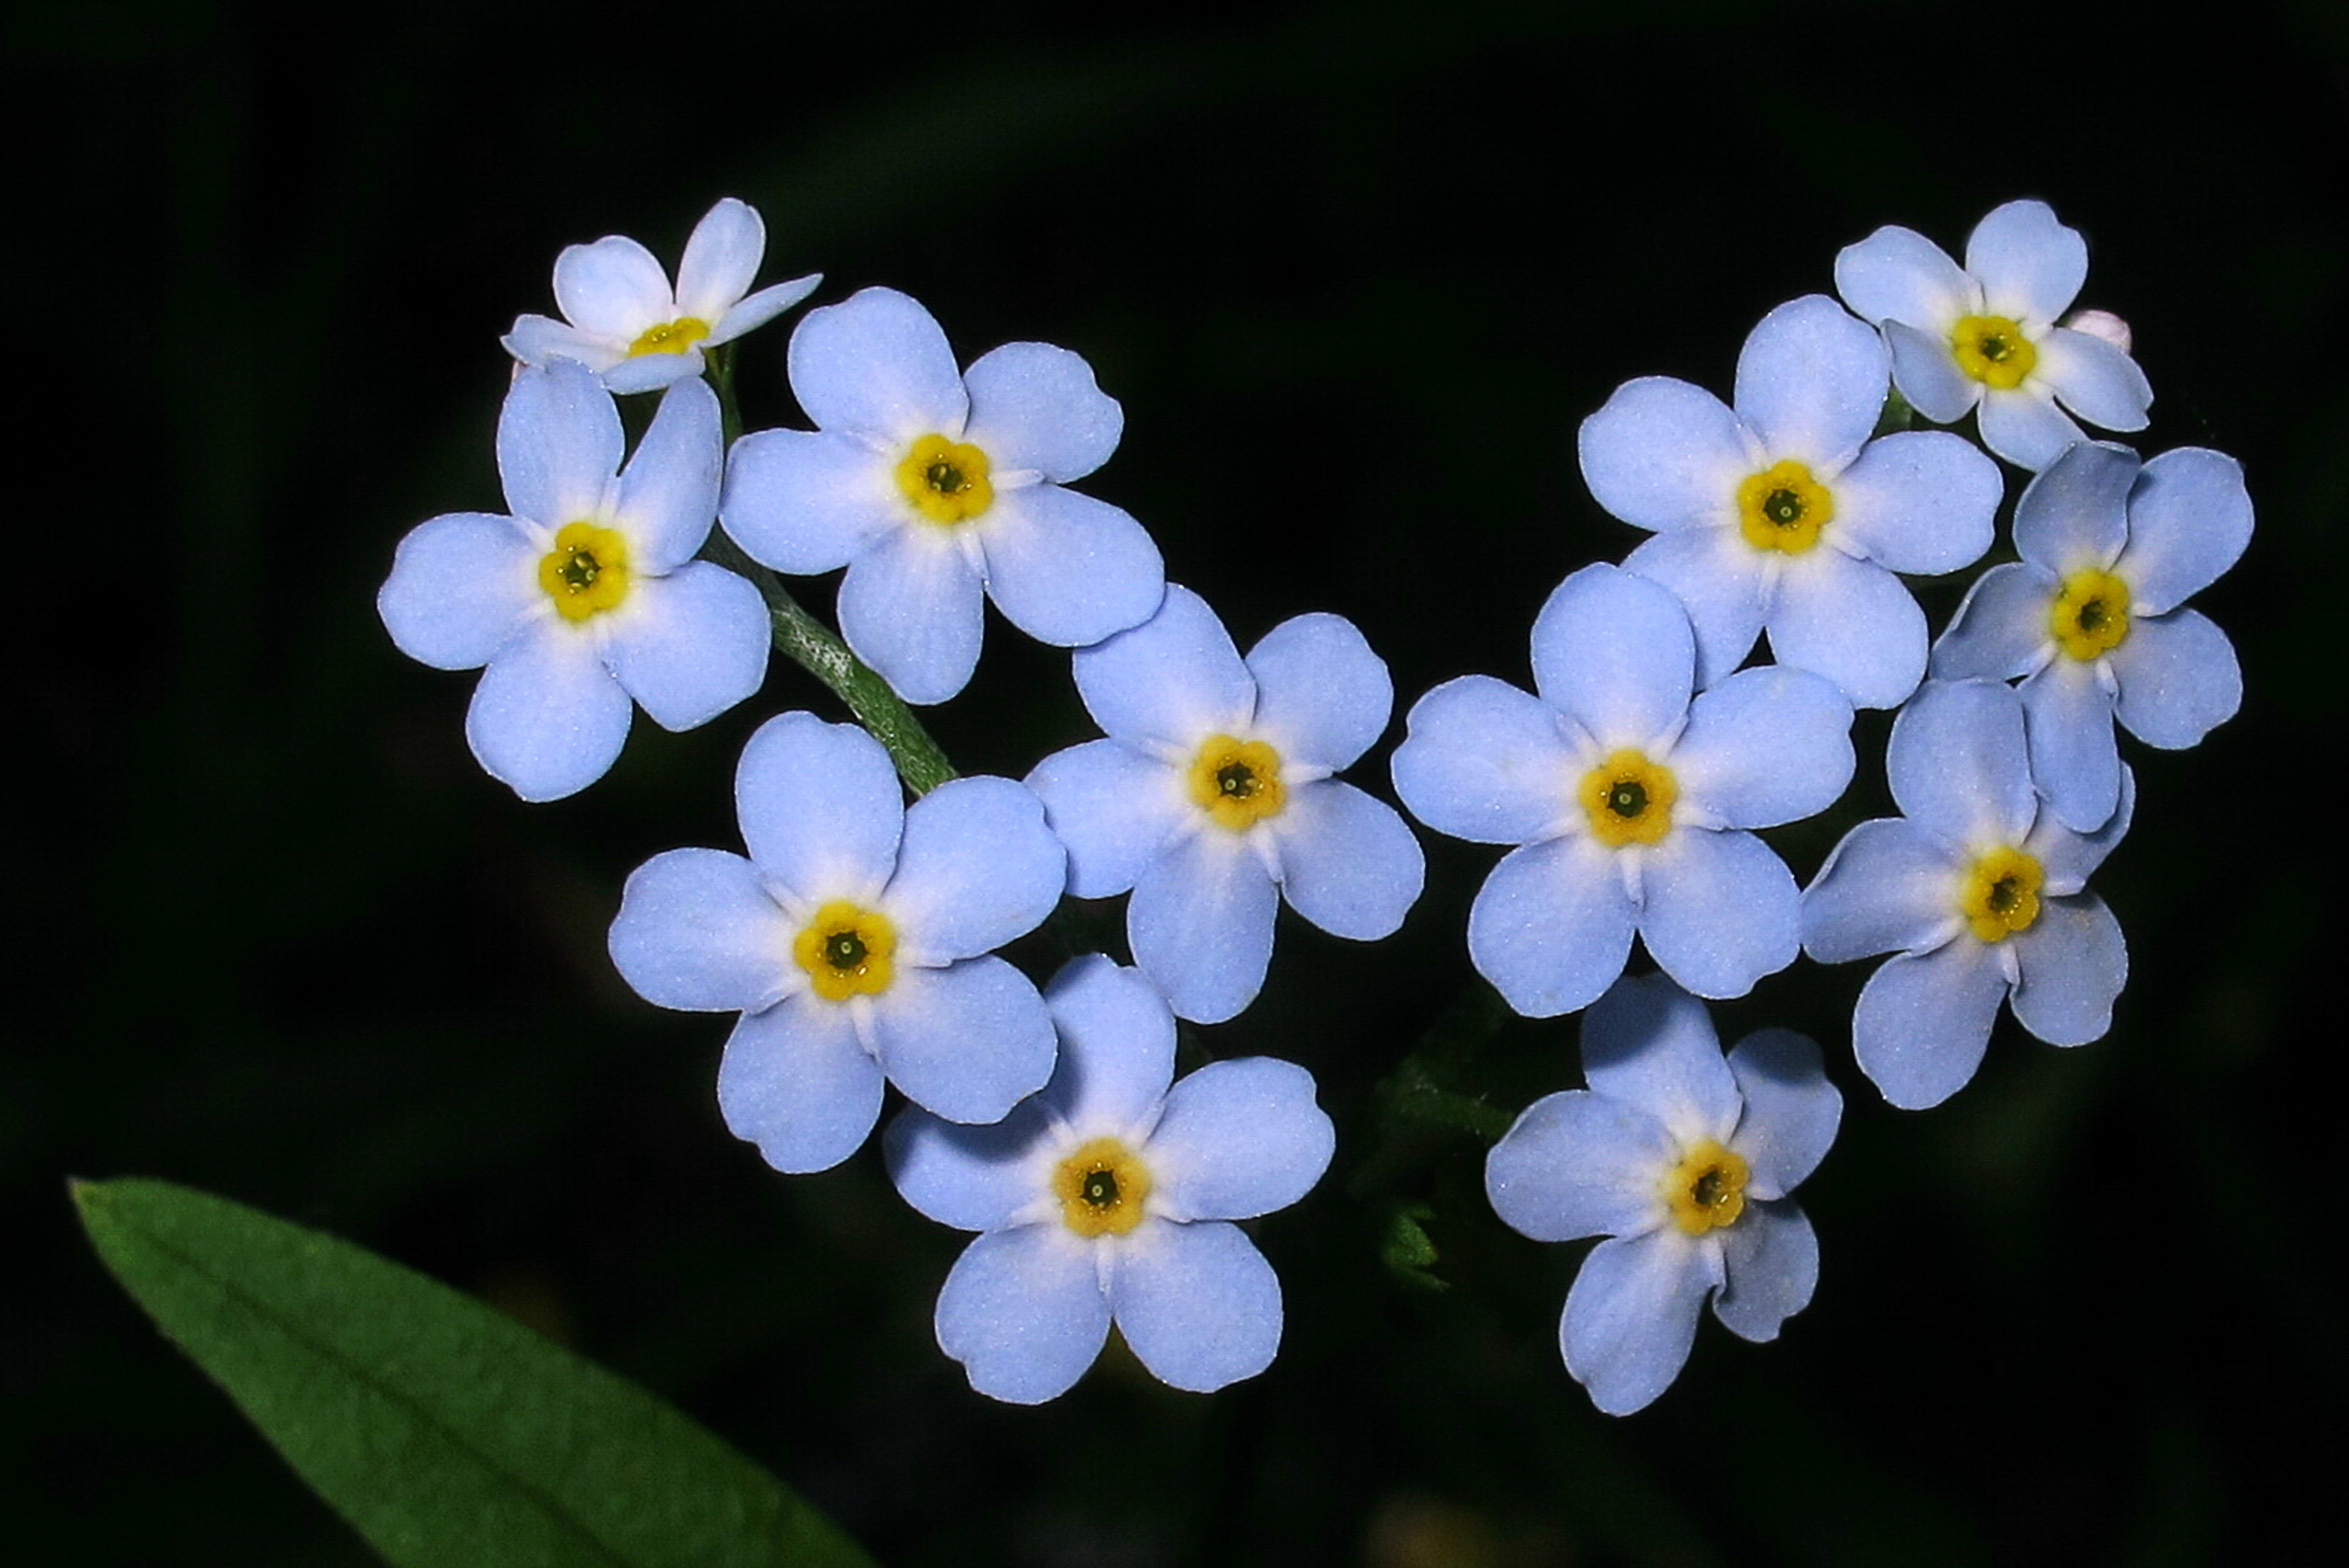 Nature Forget-Me-Not 4k Ultra HD Wallpaper